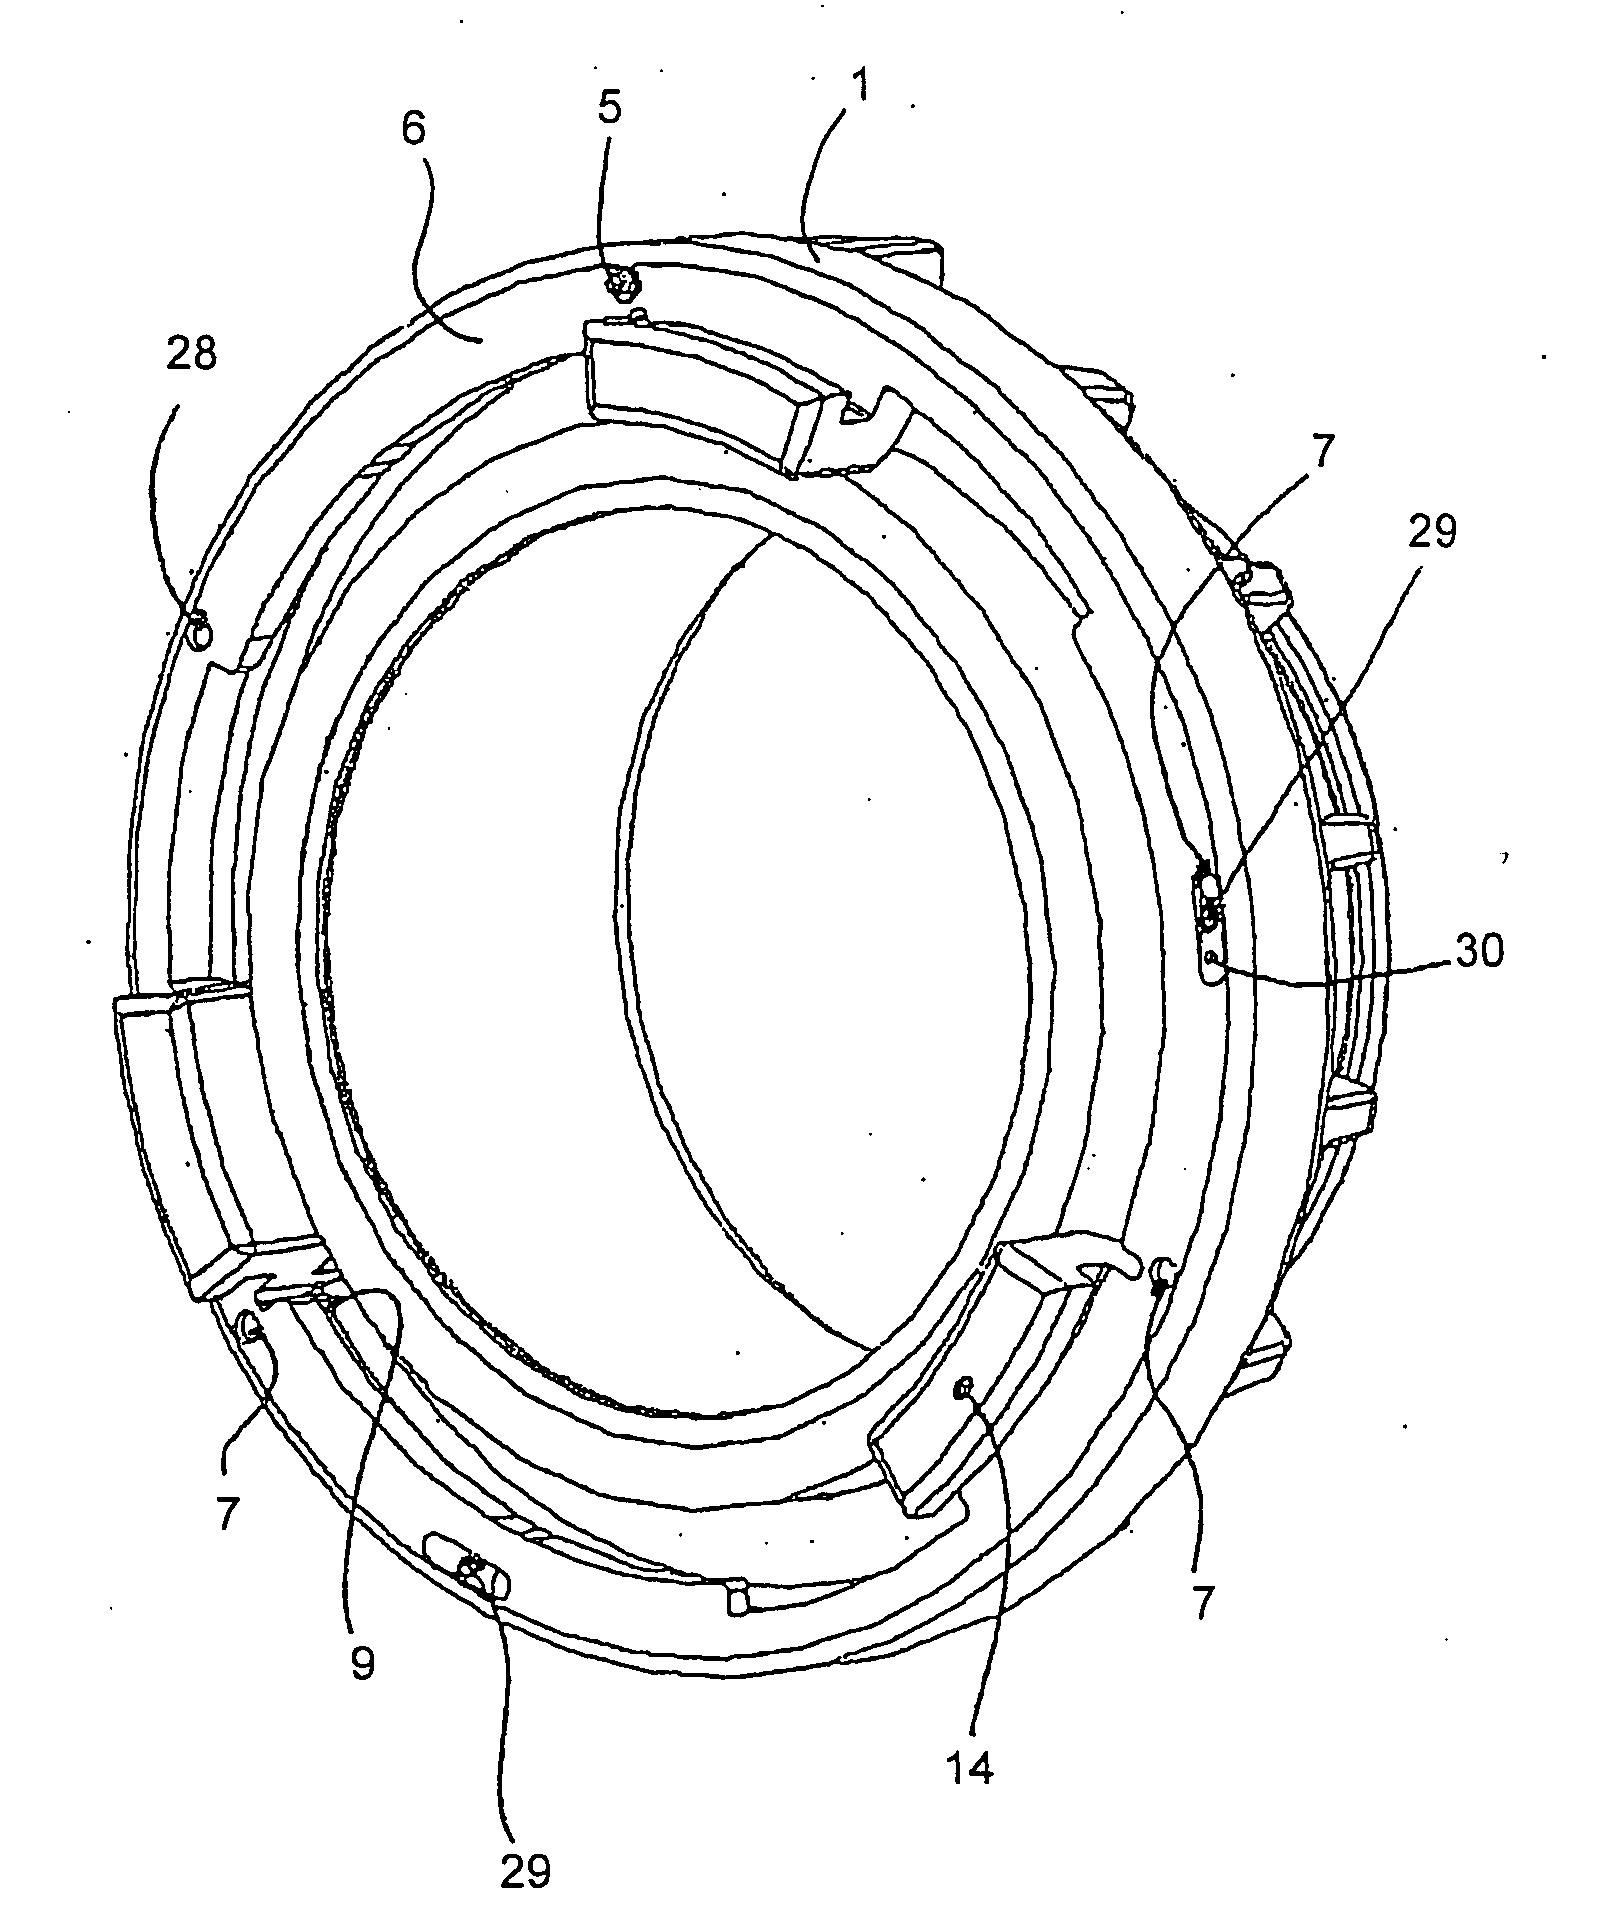 Hose coupling with a locking mechanism